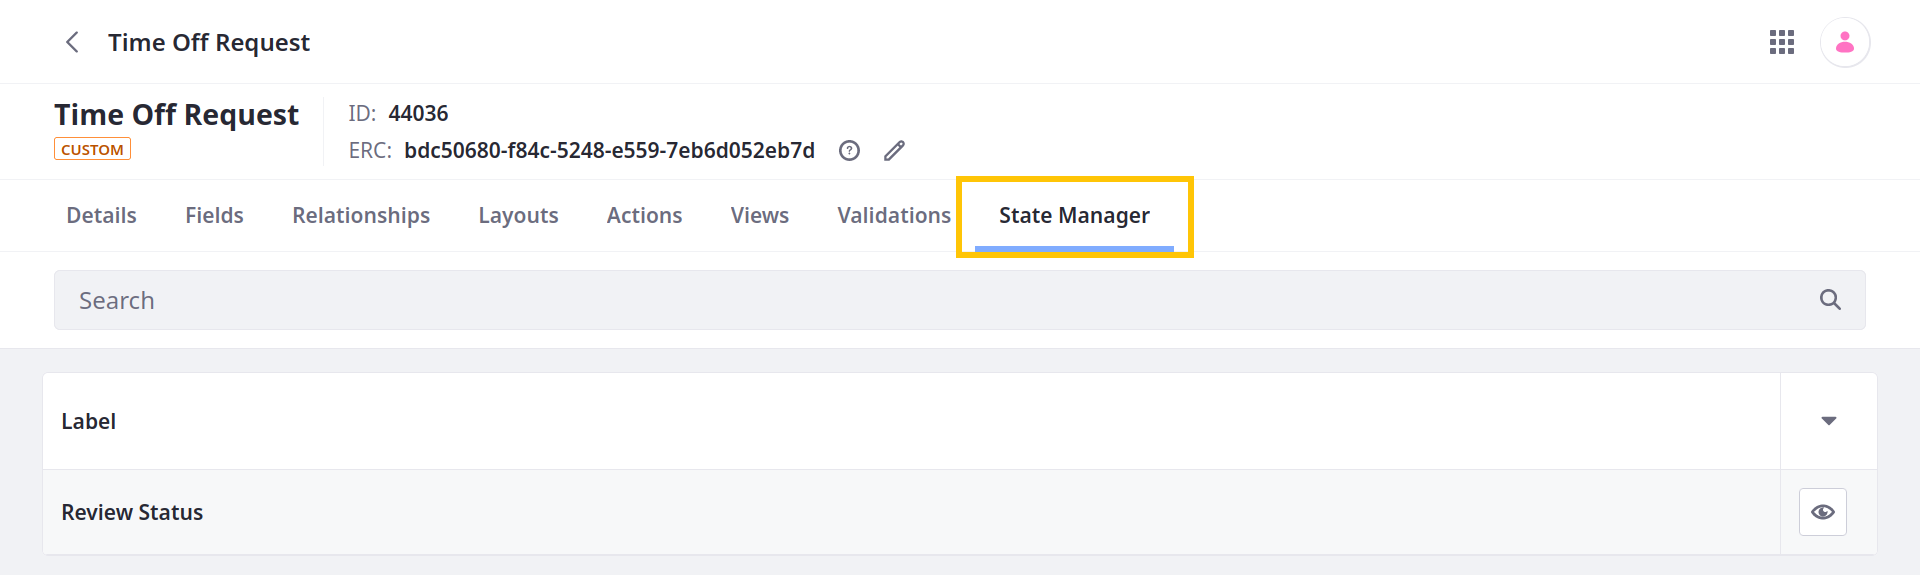 Define flows for state fields in the State Manager tab.